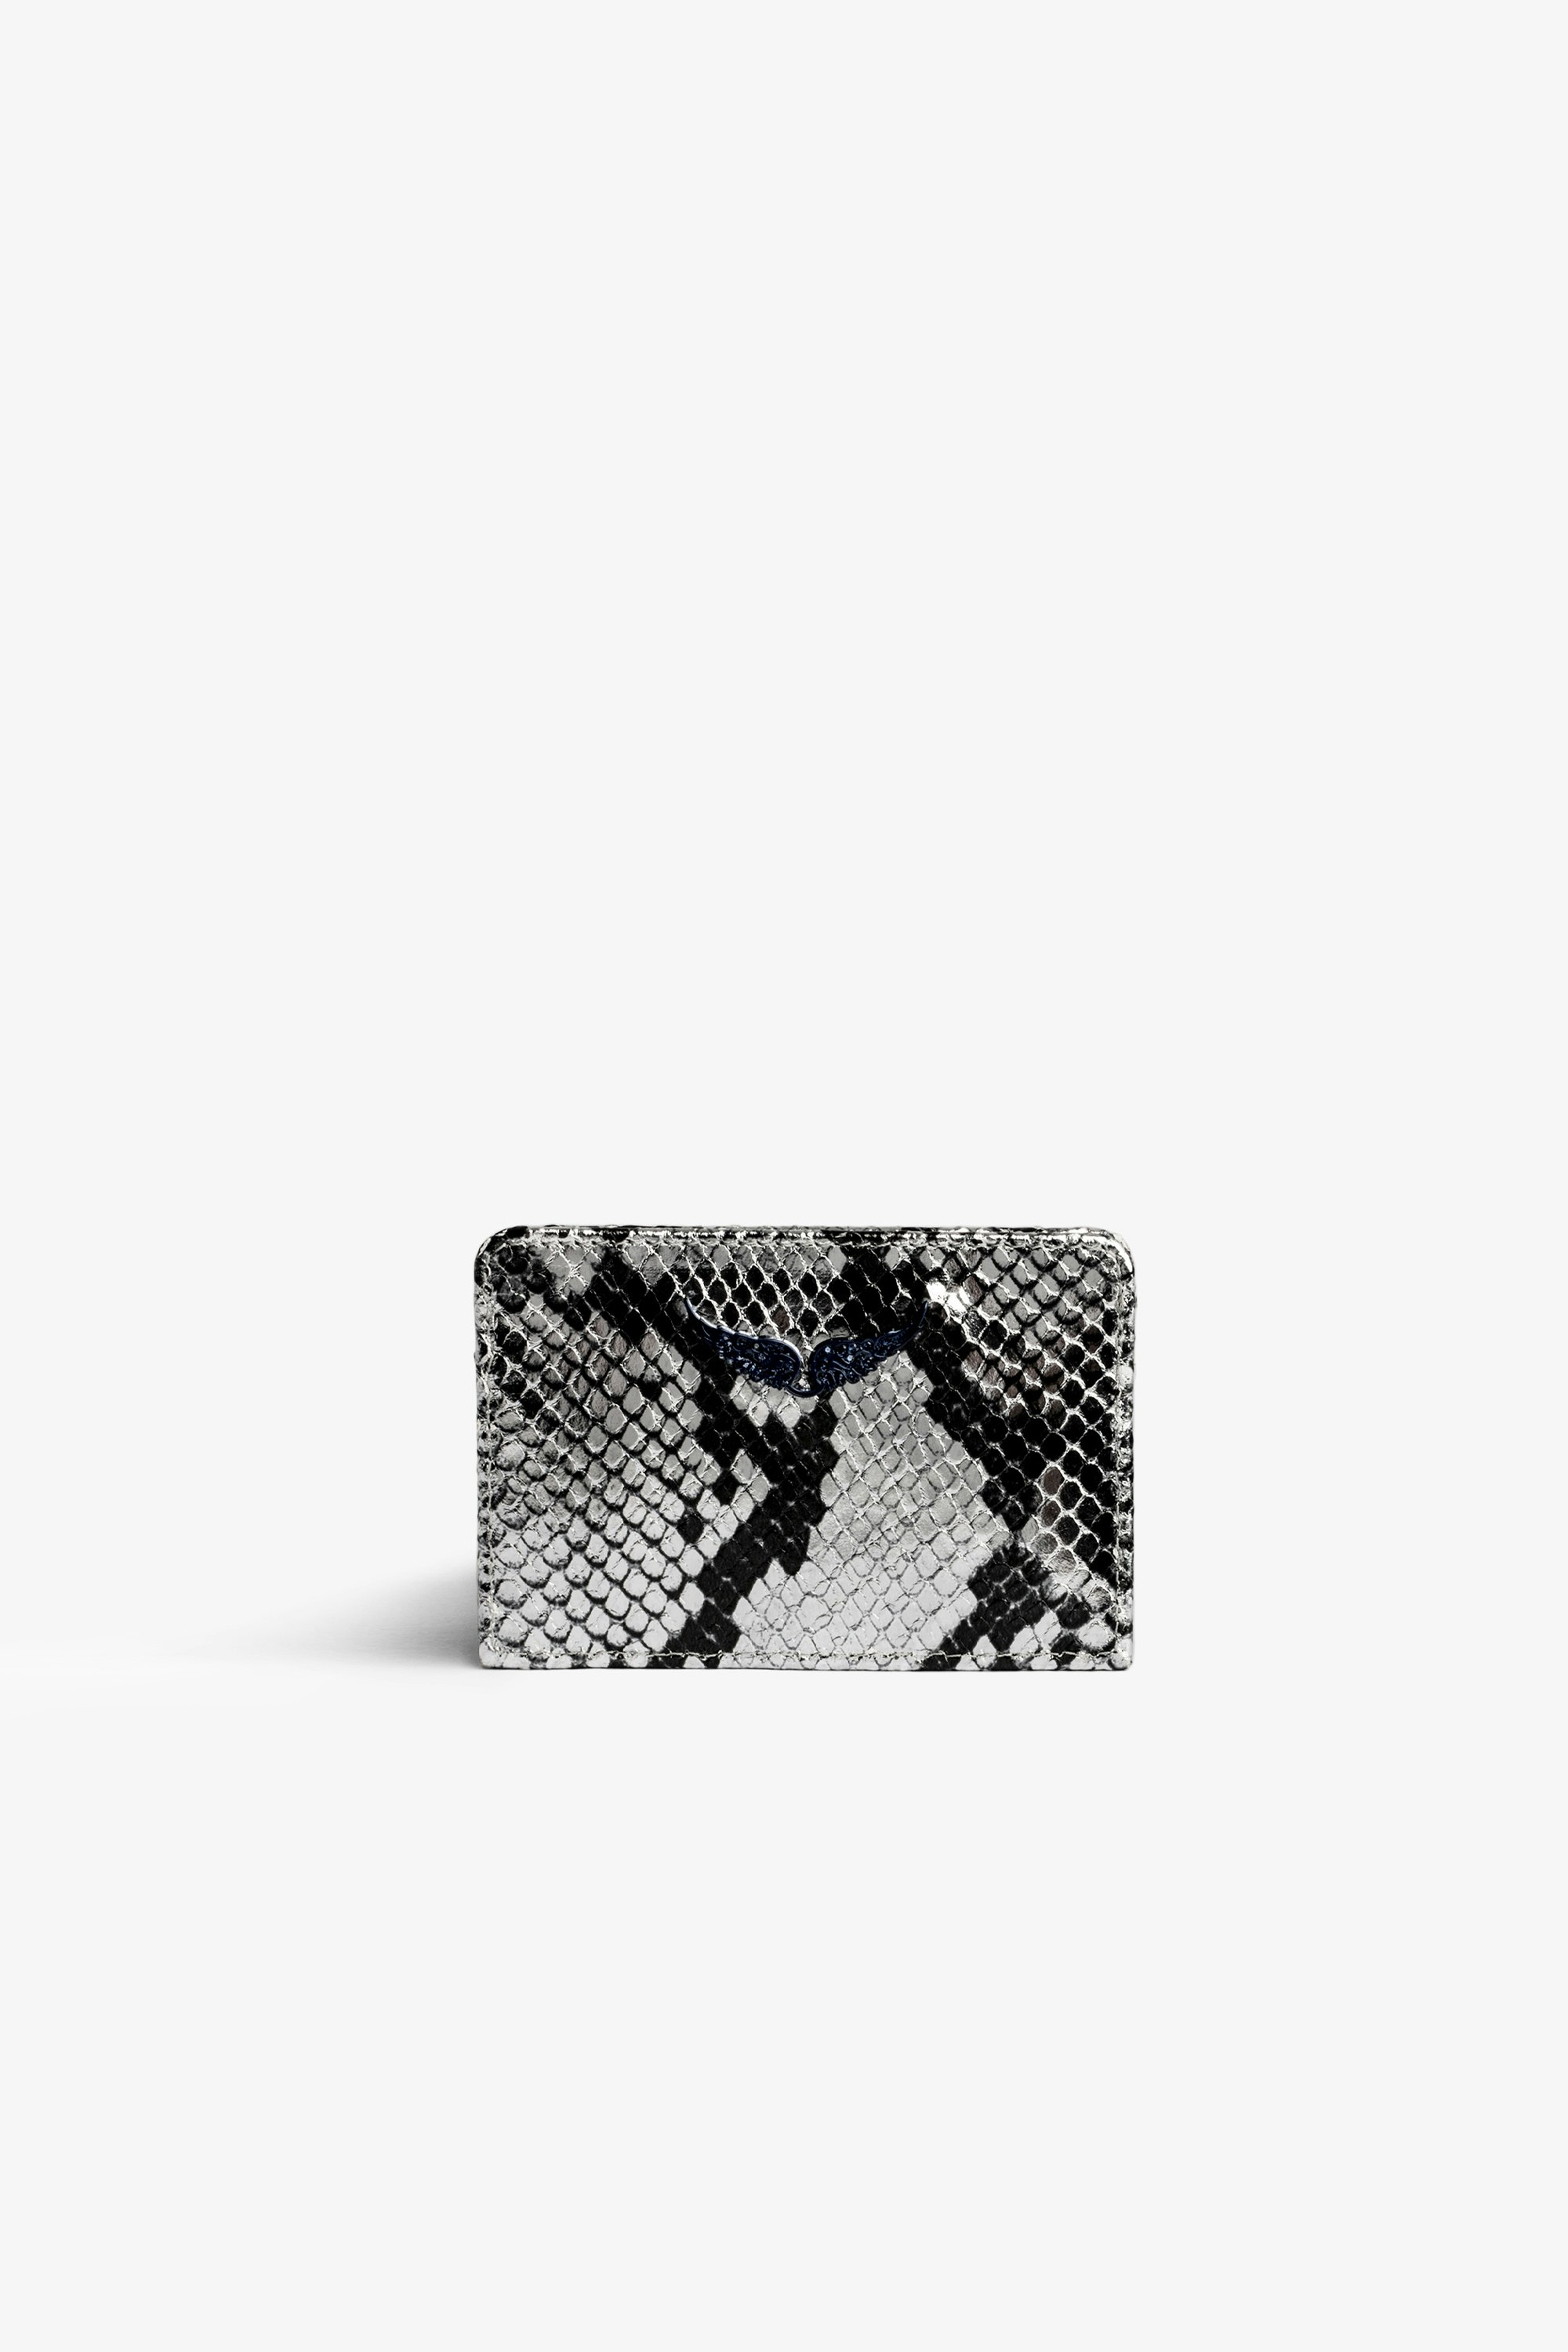 ZV Pass 財布 Women’s silver metallic snake-embossed leather card holder with crystal-embellished wings charm